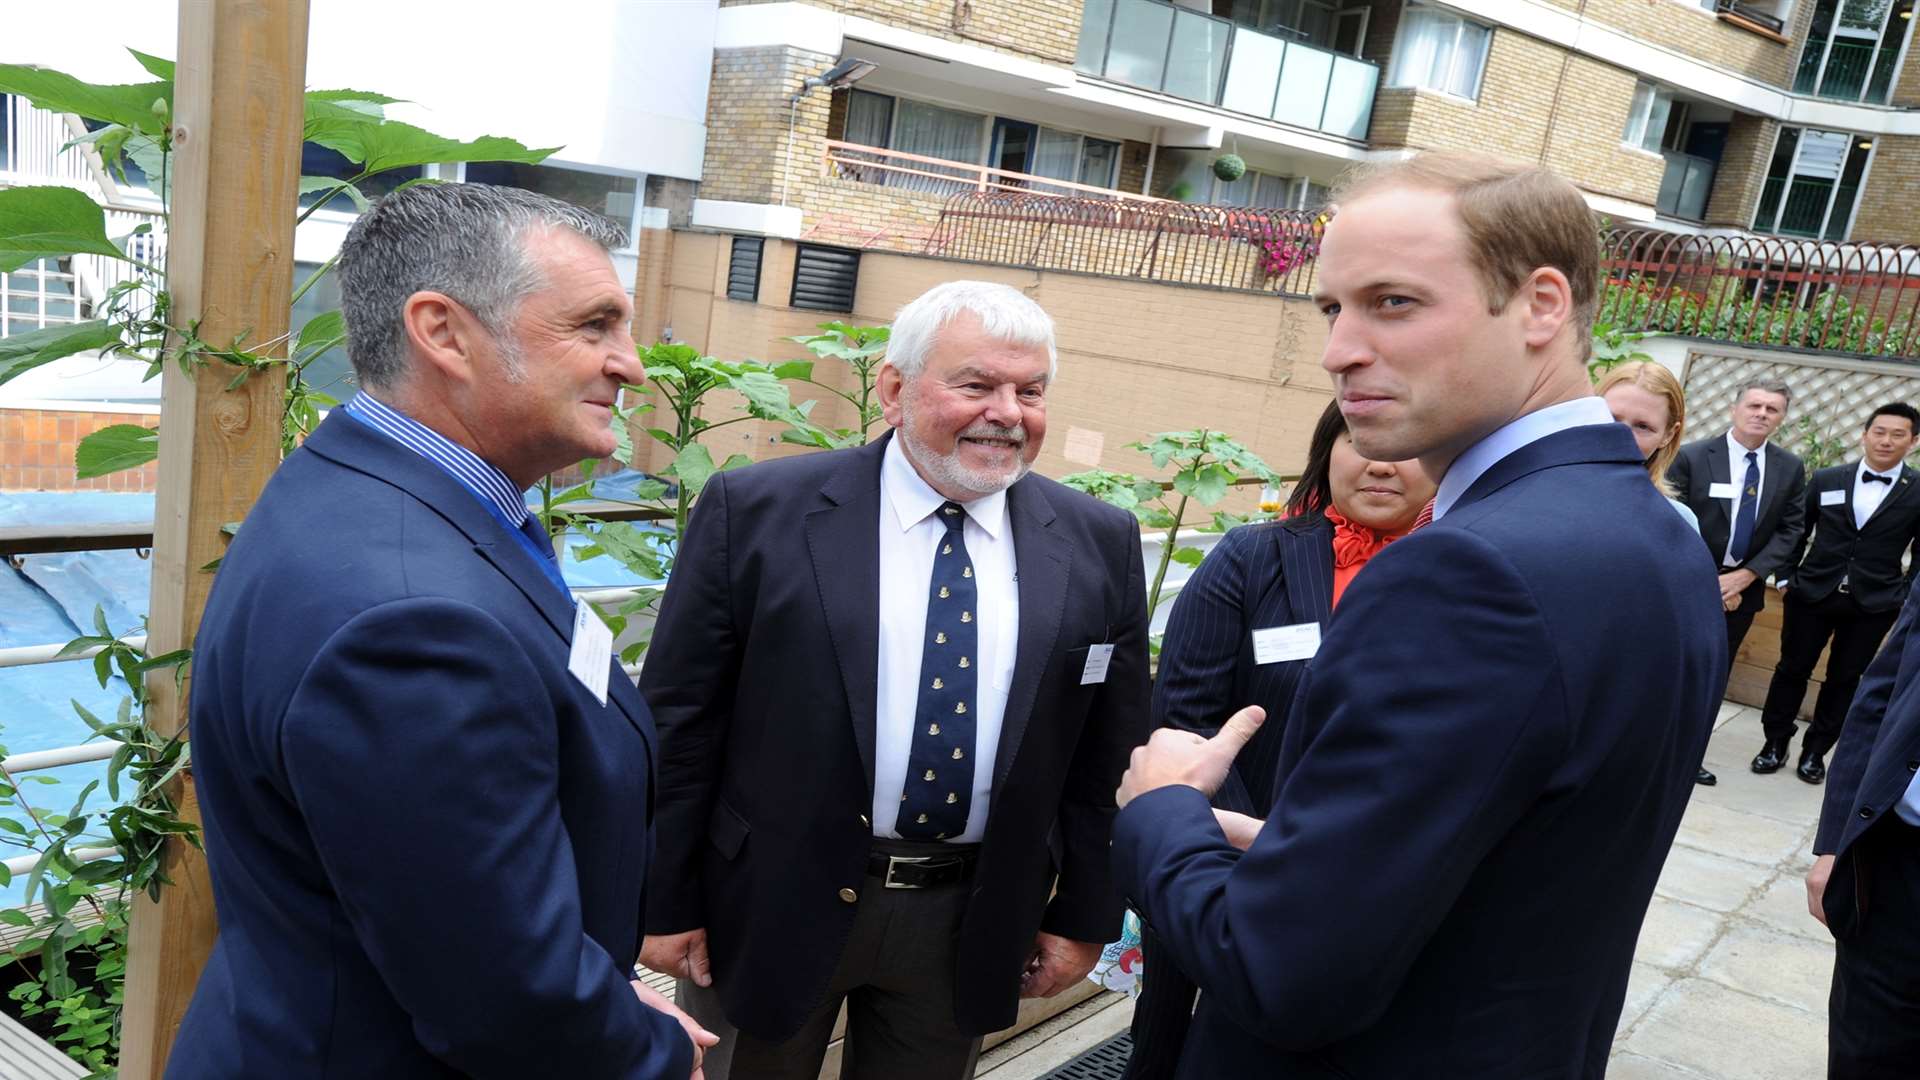 Tony Marshall is pictured meeting The Duke of Cambridge at the special BSAC reception.